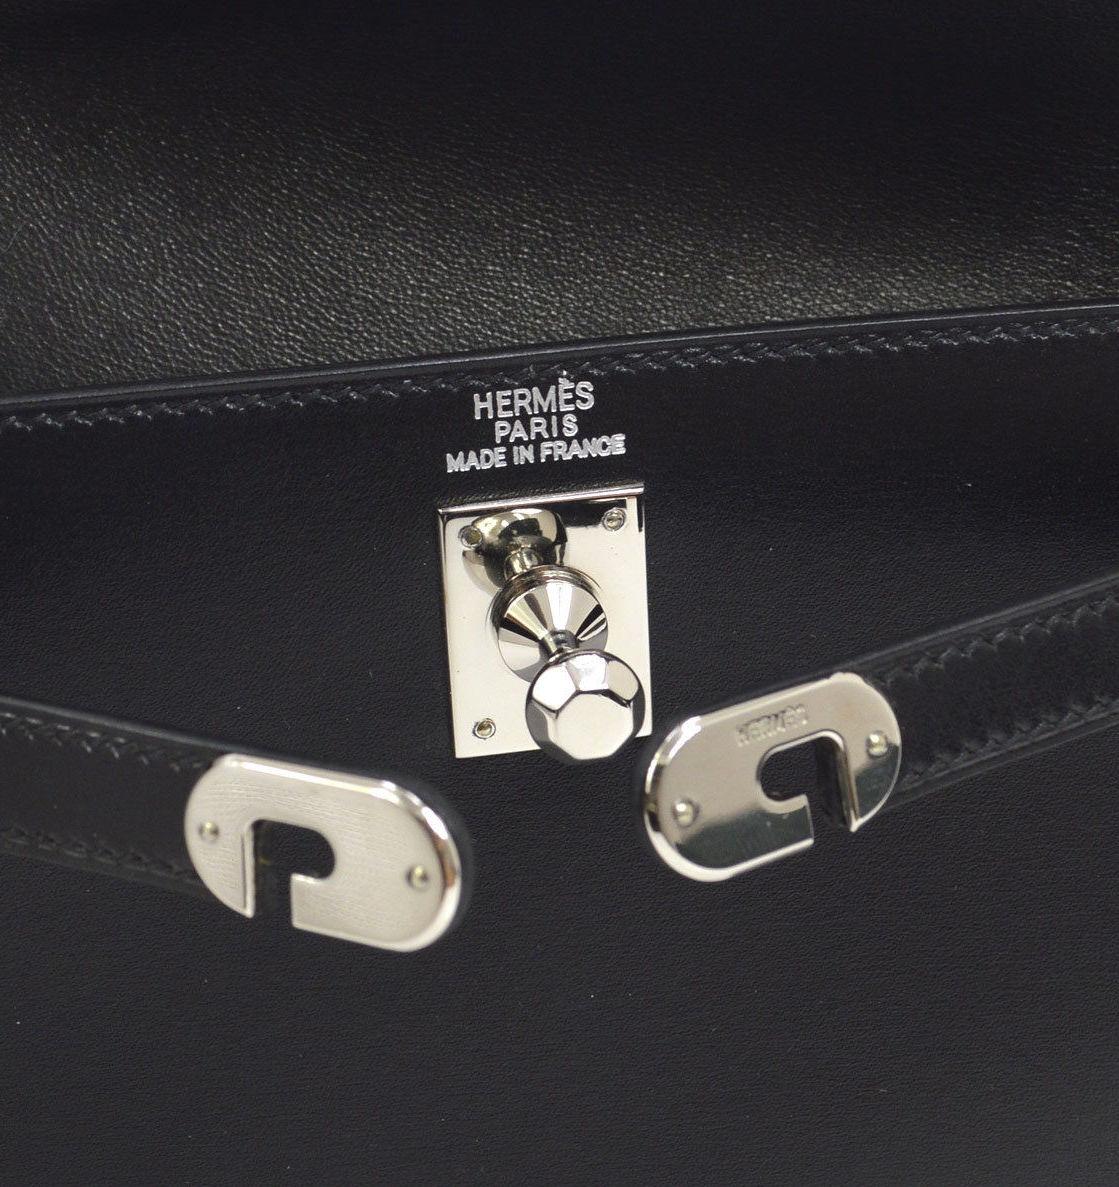 
Leather
Silver tone hardware
Turnlock closure
Leather lining
Made in France
Date code present
Measures 8.25